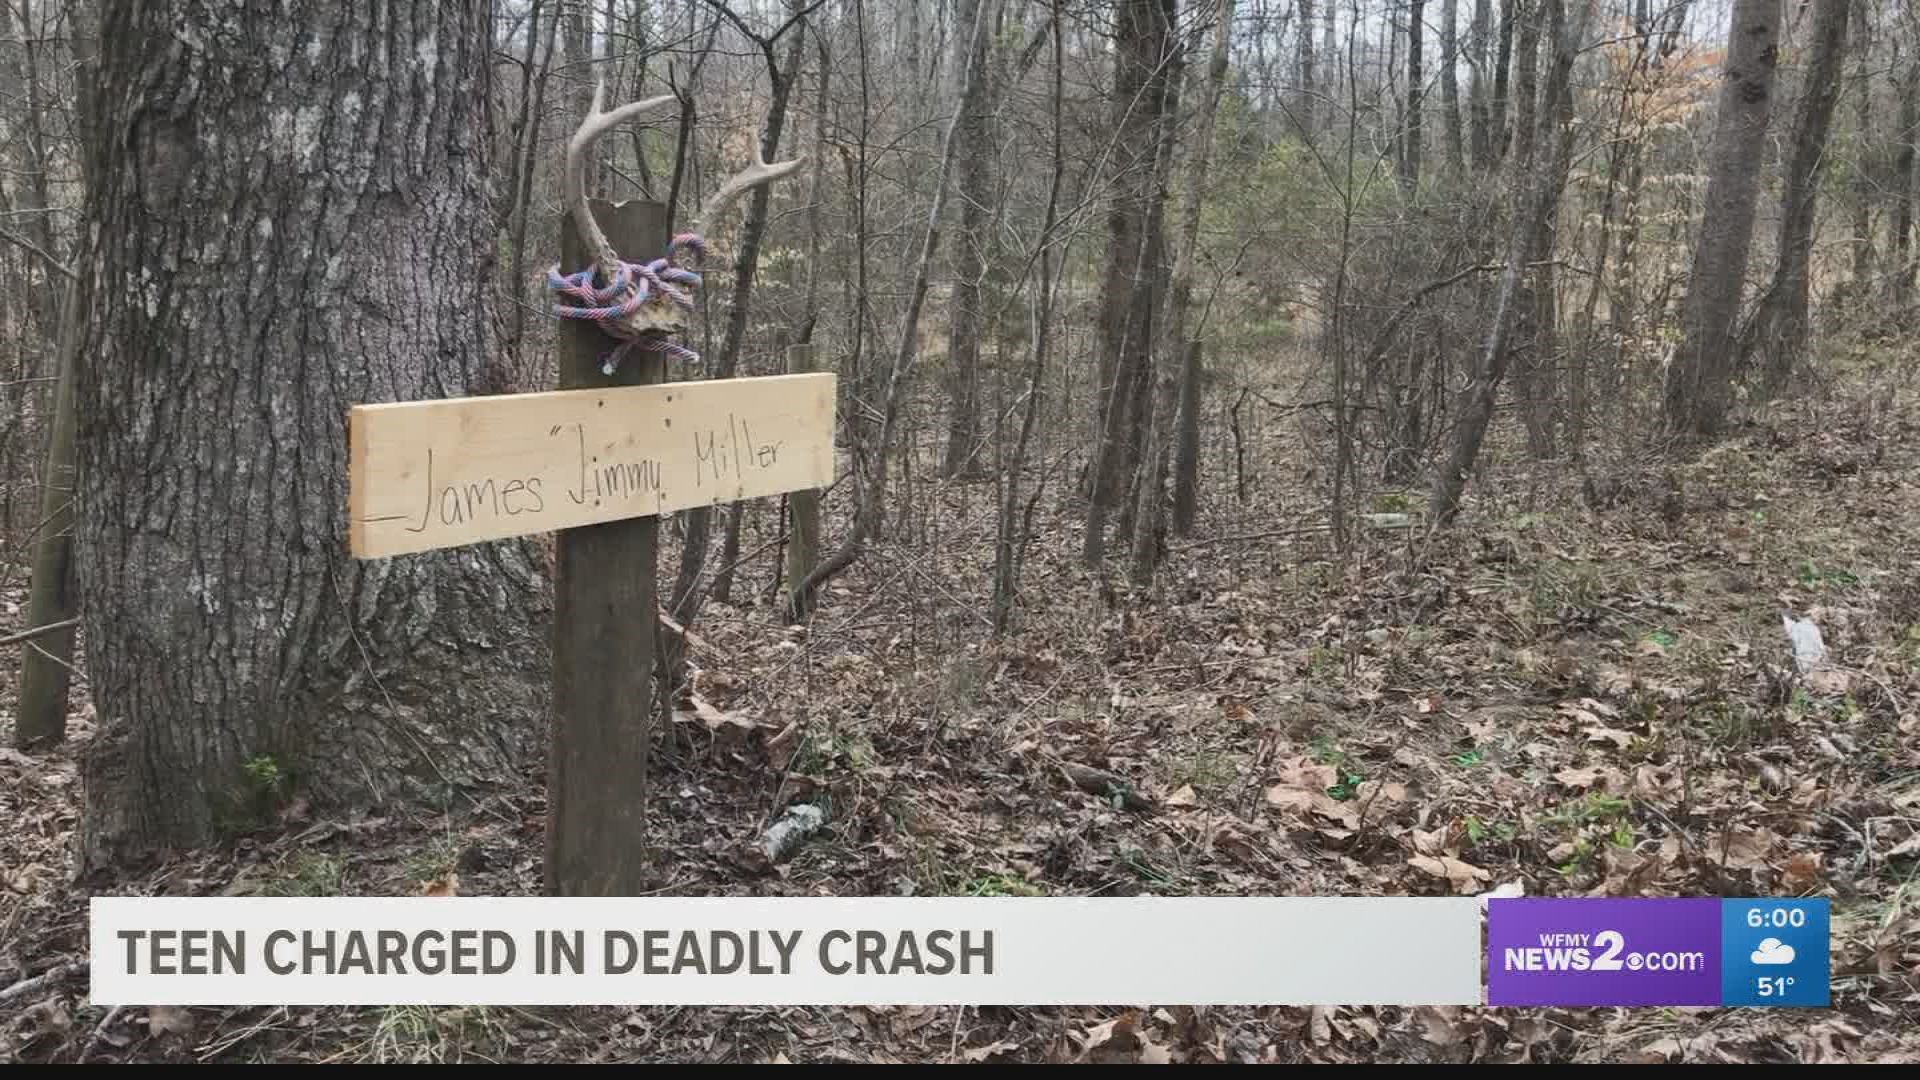 The 16-year-old was driving without a license when his truck crashed killing another teen.